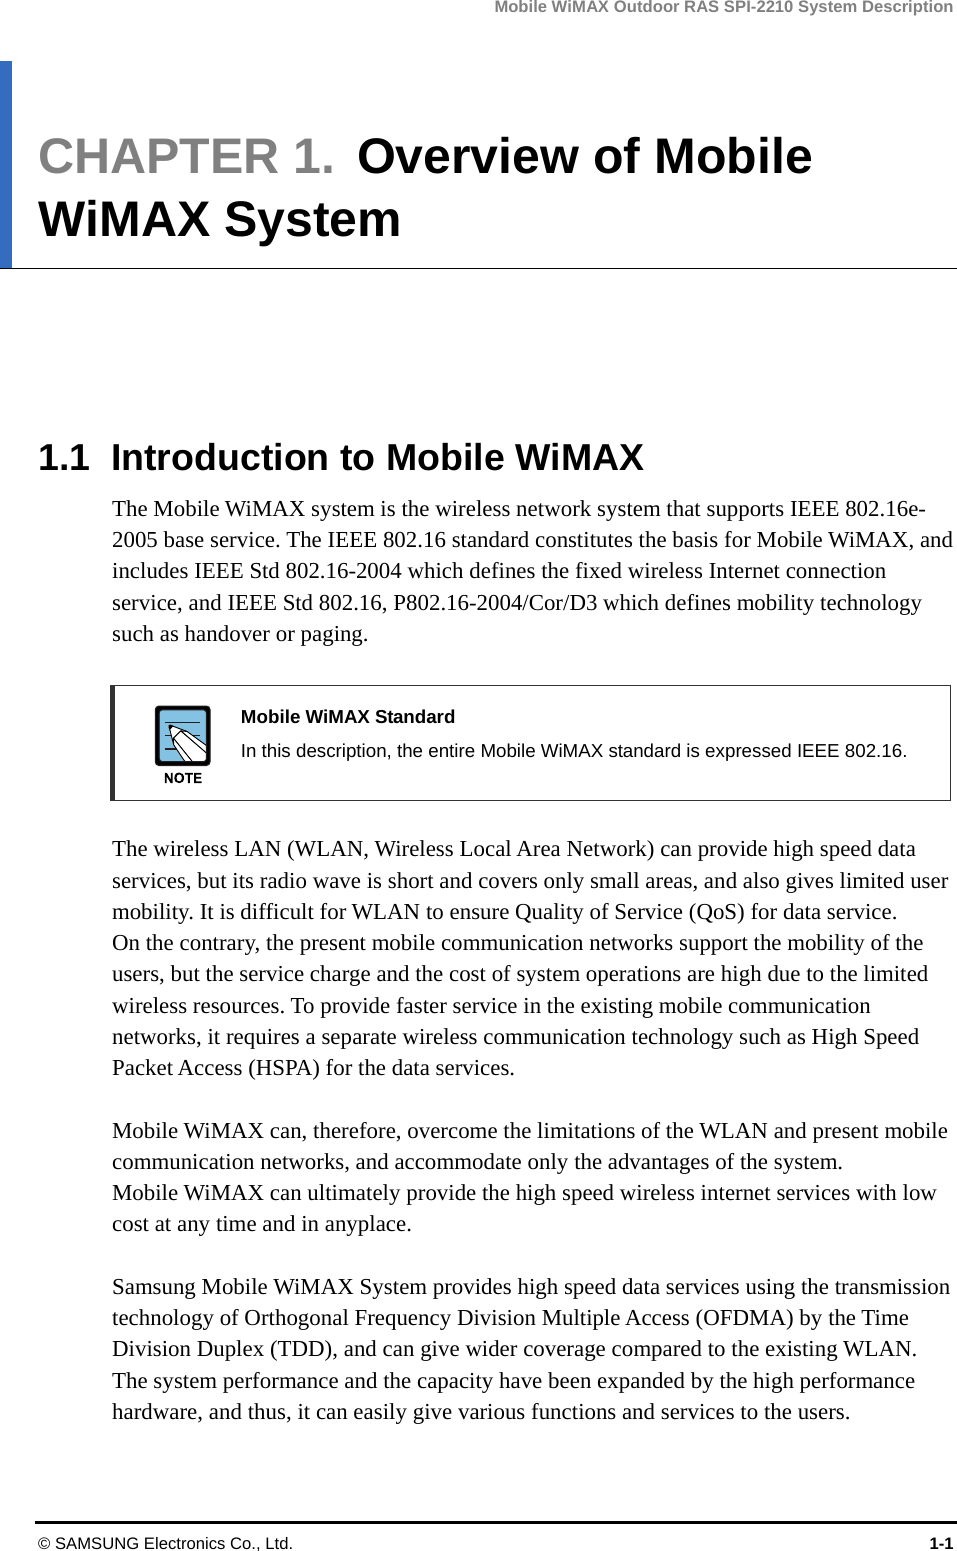 Mobile WiMAX Outdoor RAS SPI-2210 System Description © SAMSUNG Electronics Co., Ltd.  1-1 CHAPTER 1.  Overview of Mobile WiMAX System      1.1  Introduction to Mobile WiMAX The Mobile WiMAX system is the wireless network system that supports IEEE 802.16e-2005 base service. The IEEE 802.16 standard constitutes the basis for Mobile WiMAX, and includes IEEE Std 802.16-2004 which defines the fixed wireless Internet connection service, and IEEE Std 802.16, P802.16-2004/Cor/D3 which defines mobility technology such as handover or paging.   Mobile WiMAX Standard   In this description, the entire Mobile WiMAX standard is expressed IEEE 802.16.  The wireless LAN (WLAN, Wireless Local Area Network) can provide high speed data services, but its radio wave is short and covers only small areas, and also gives limited user mobility. It is difficult for WLAN to ensure Quality of Service (QoS) for data service.   On the contrary, the present mobile communication networks support the mobility of the users, but the service charge and the cost of system operations are high due to the limited wireless resources. To provide faster service in the existing mobile communication networks, it requires a separate wireless communication technology such as High Speed Packet Access (HSPA) for the data services.  Mobile WiMAX can, therefore, overcome the limitations of the WLAN and present mobile communication networks, and accommodate only the advantages of the system.   Mobile WiMAX can ultimately provide the high speed wireless internet services with low cost at any time and in anyplace.    Samsung Mobile WiMAX System provides high speed data services using the transmission technology of Orthogonal Frequency Division Multiple Access (OFDMA) by the Time Division Duplex (TDD), and can give wider coverage compared to the existing WLAN.   The system performance and the capacity have been expanded by the high performance hardware, and thus, it can easily give various functions and services to the users.  